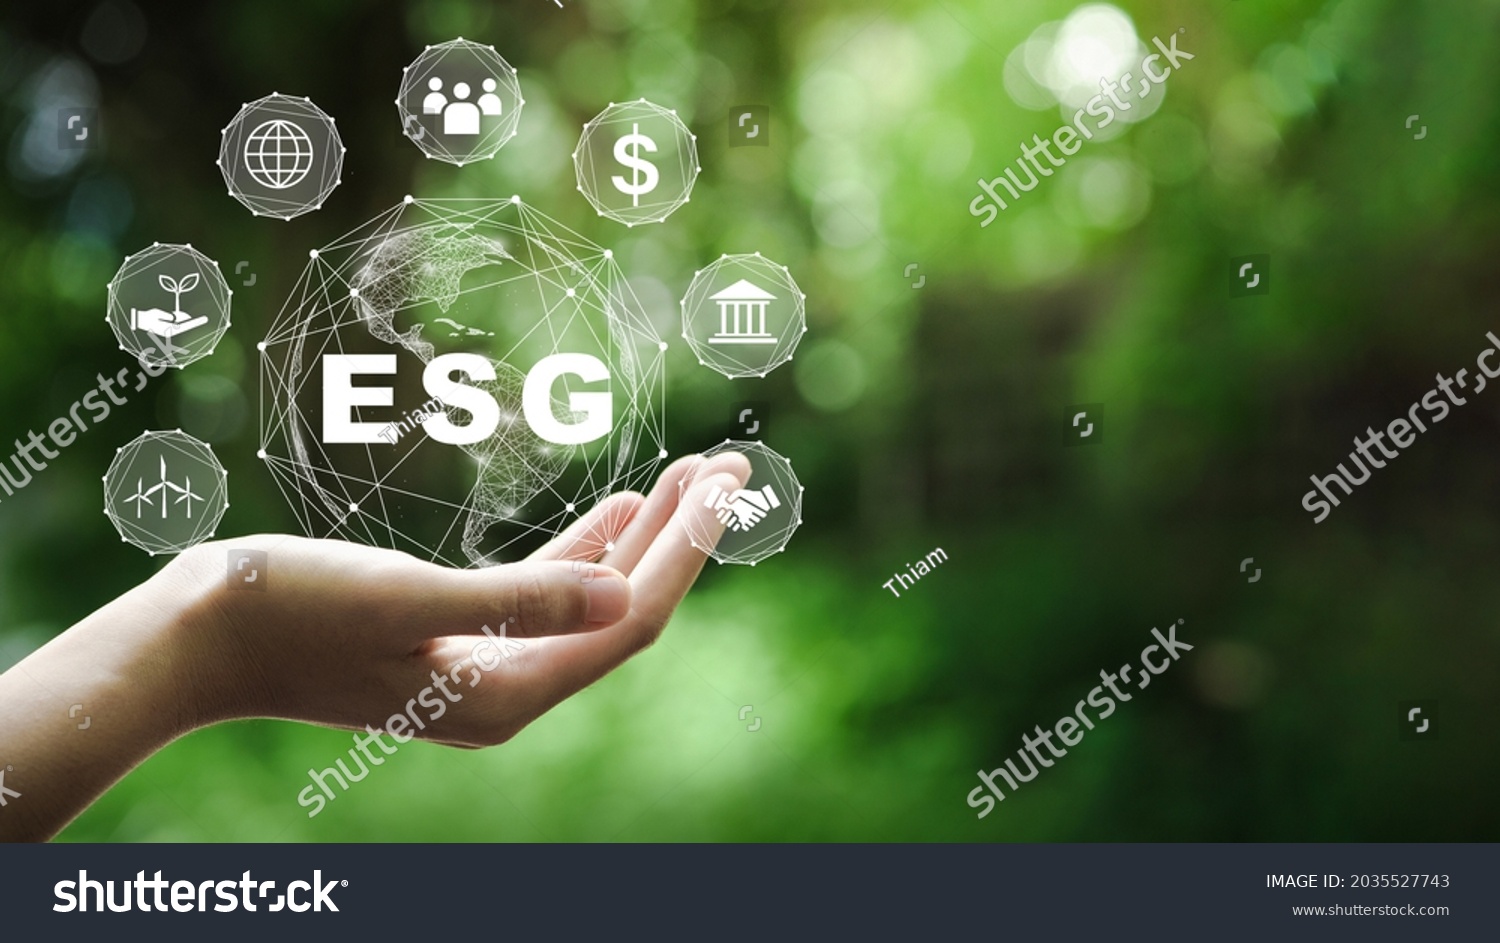 ESG icon concept in the hand for environmental, social, and governance in sustainable and ethical business on the Network connection on a green background. #2035527743